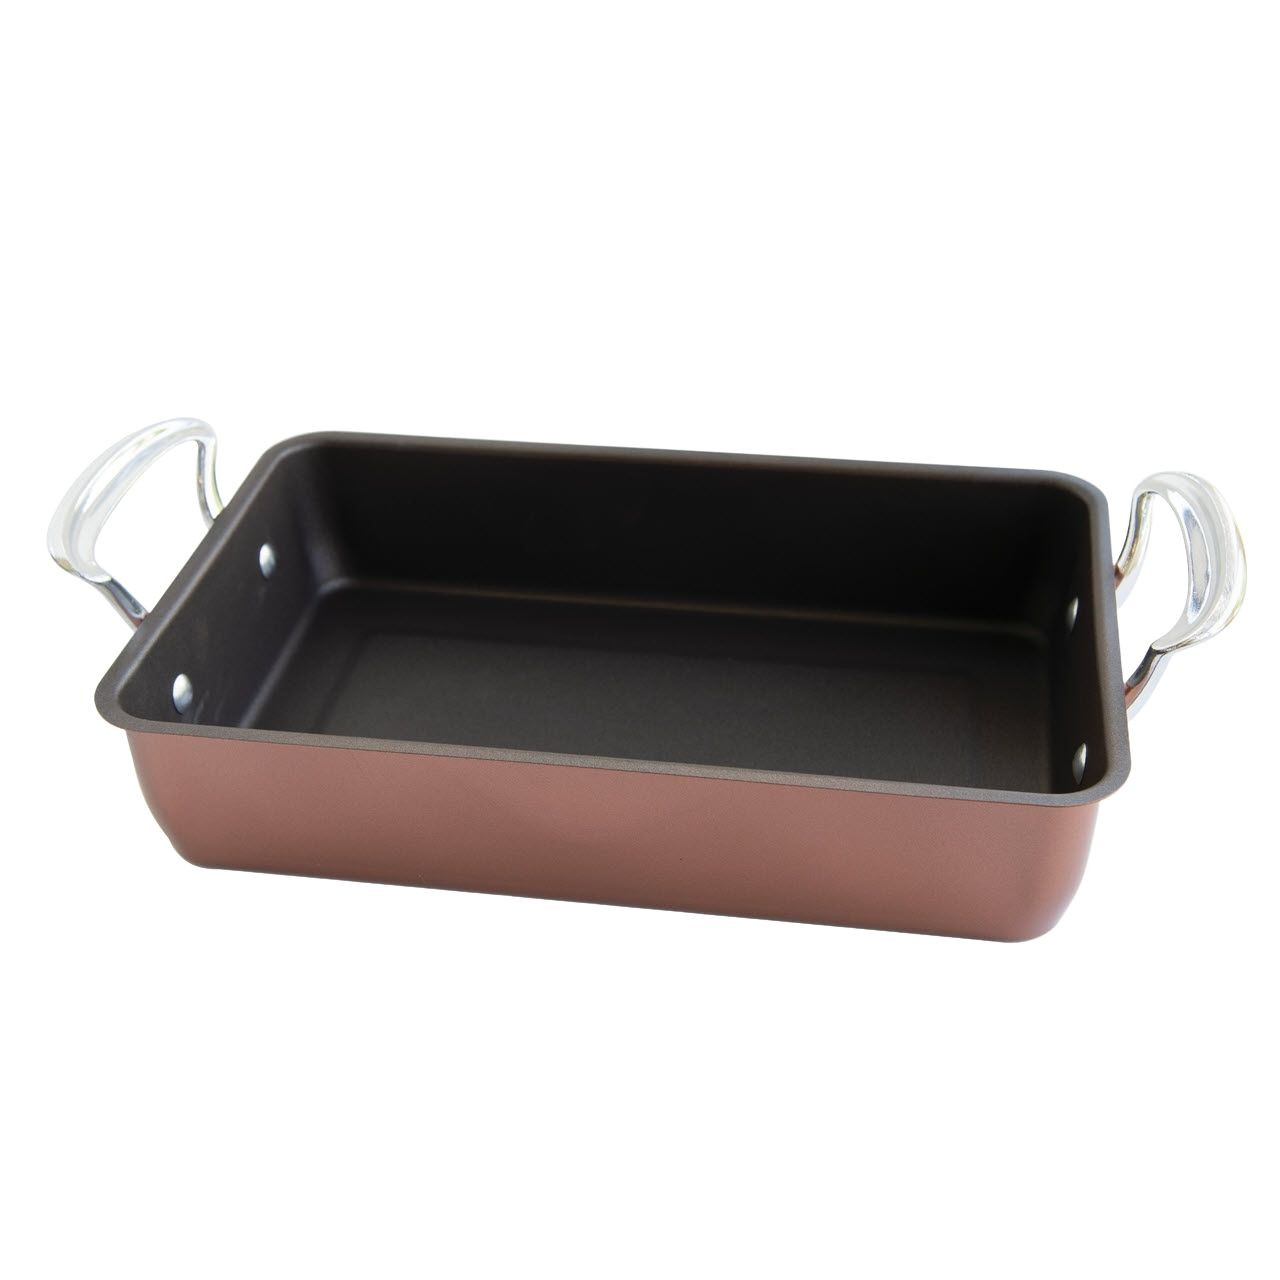 Nordic Ware Copper Roaster Large